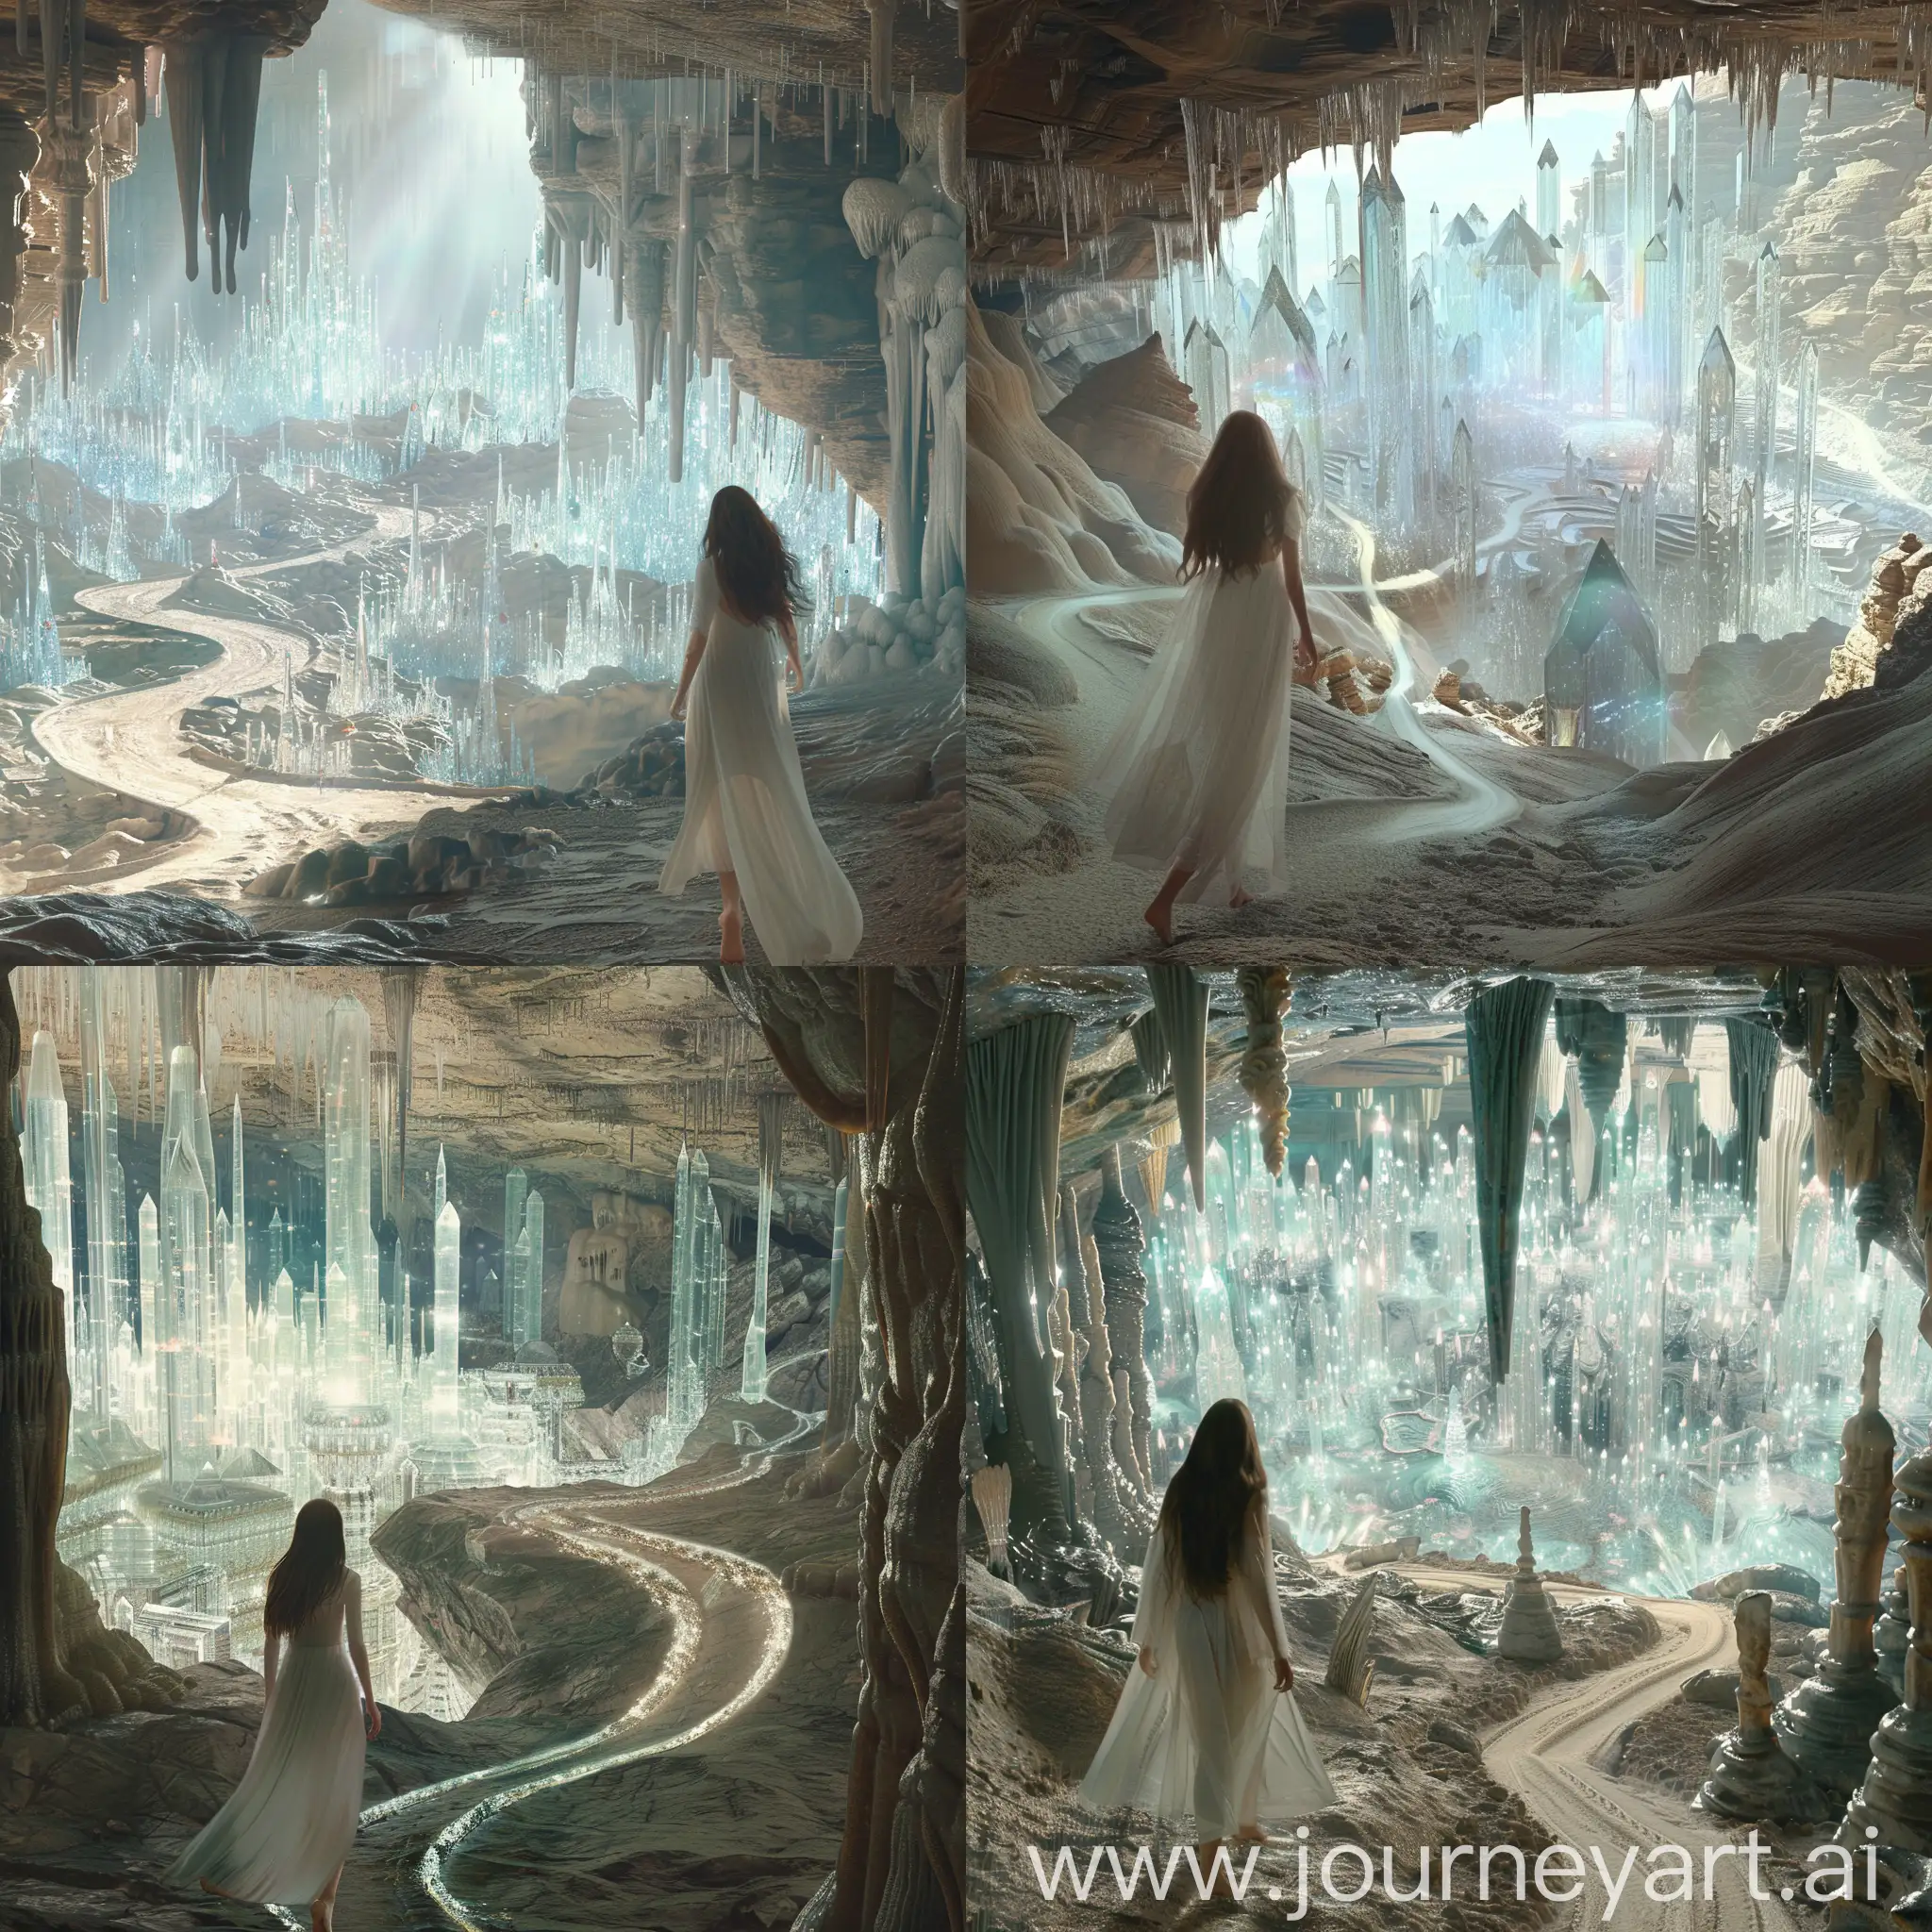 A stunningly realistic and cinematic rendering of a vast cavern with an awe-inspiring view of a crystal city. The city consists of transparent, prismatic structures that emit a soft, bright light, creating a breathtaking view. The cave contains stalactites and stalagmites, and there is a winding path to the entrance of the crystal city. The atmosphere is calm and mysterious, as if the viewer is embarking on an adventure into an uncharted world. A woman with long brown hair walks from the cave entrance and approaches the city. The woman is wearing a long white dress and her feet are bare. The woman's dress is inspired by ancient times.